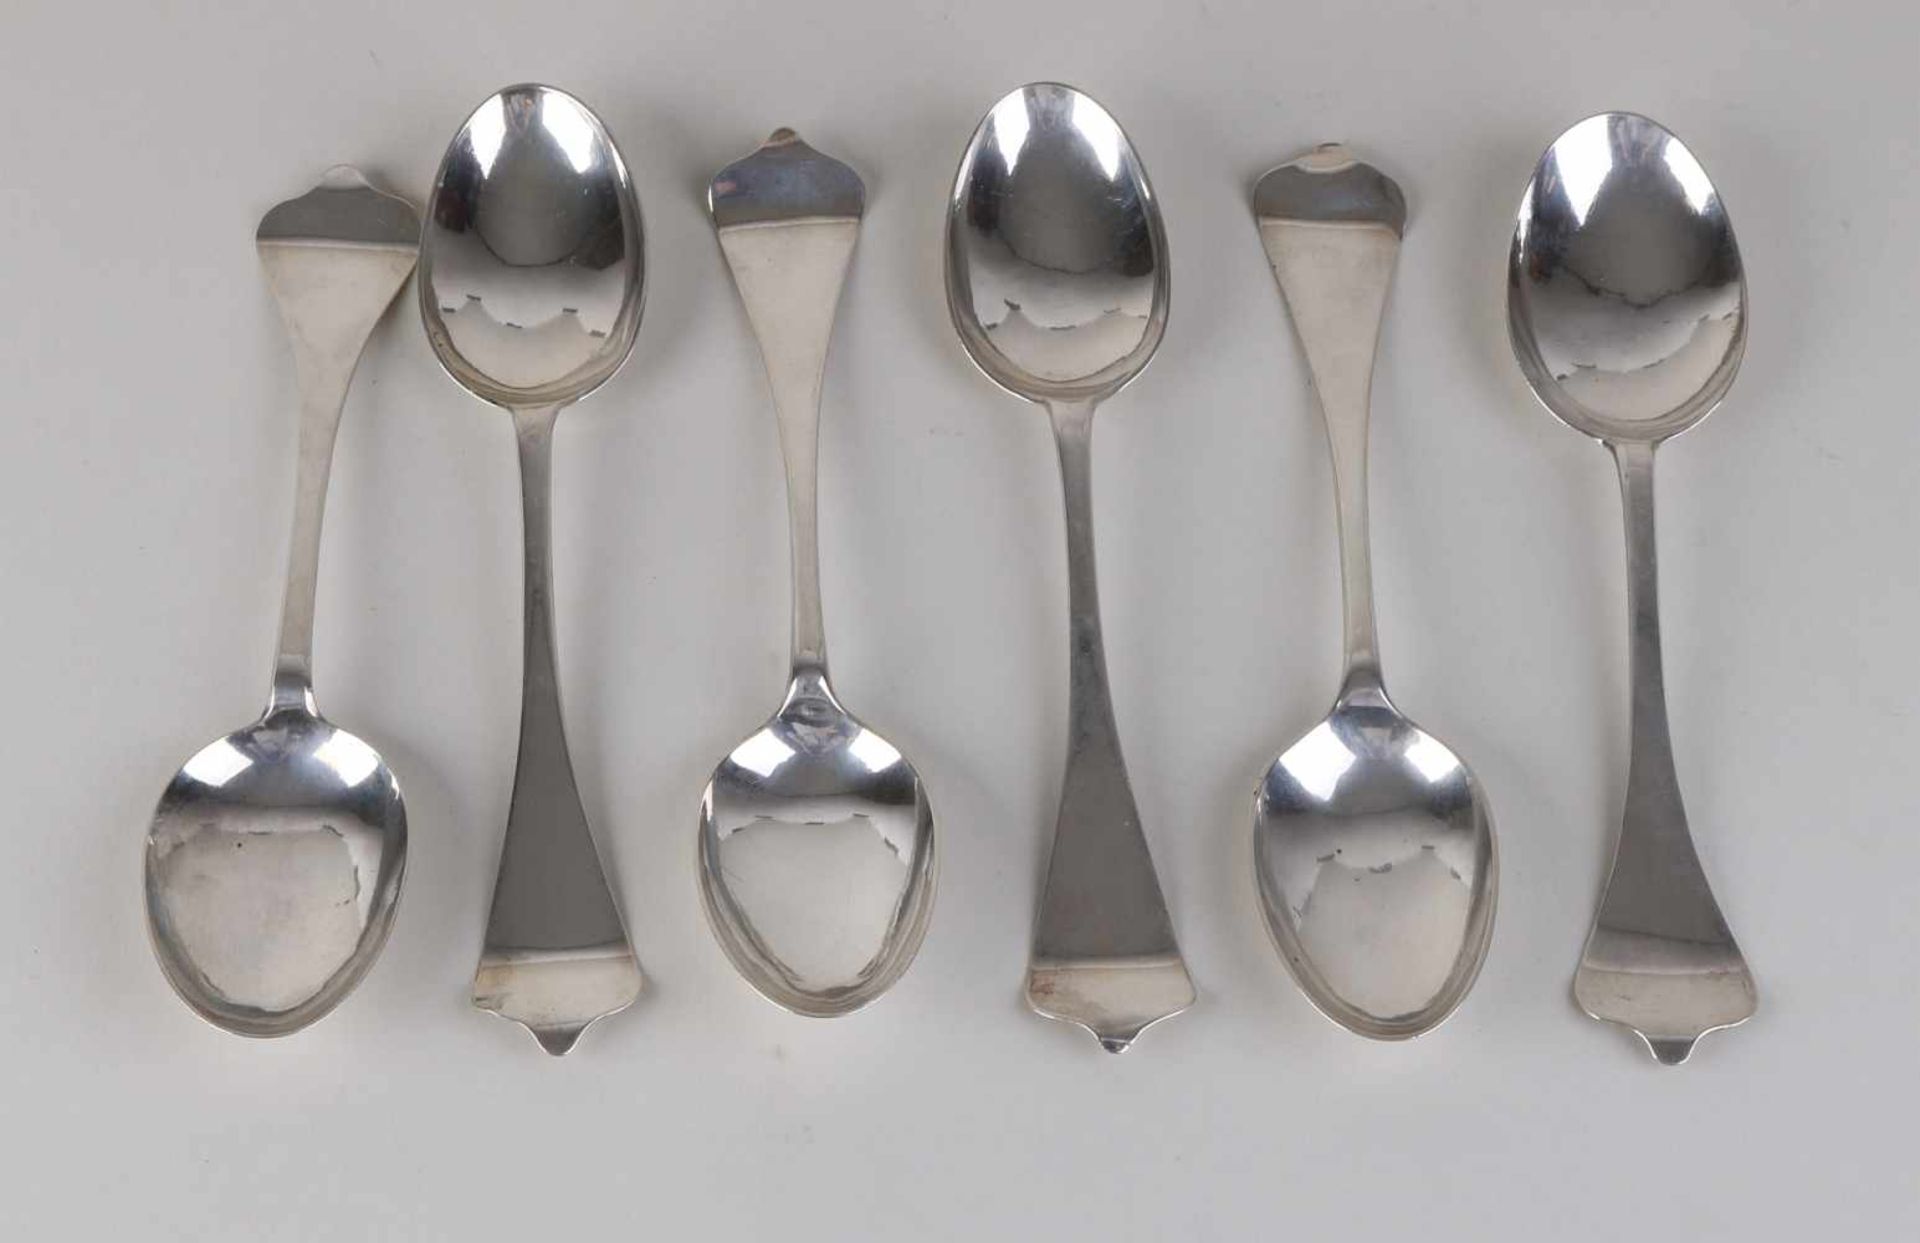 Six silver antique spoons, with a needle with comb and a stem end with a battery tray shape. MT .: